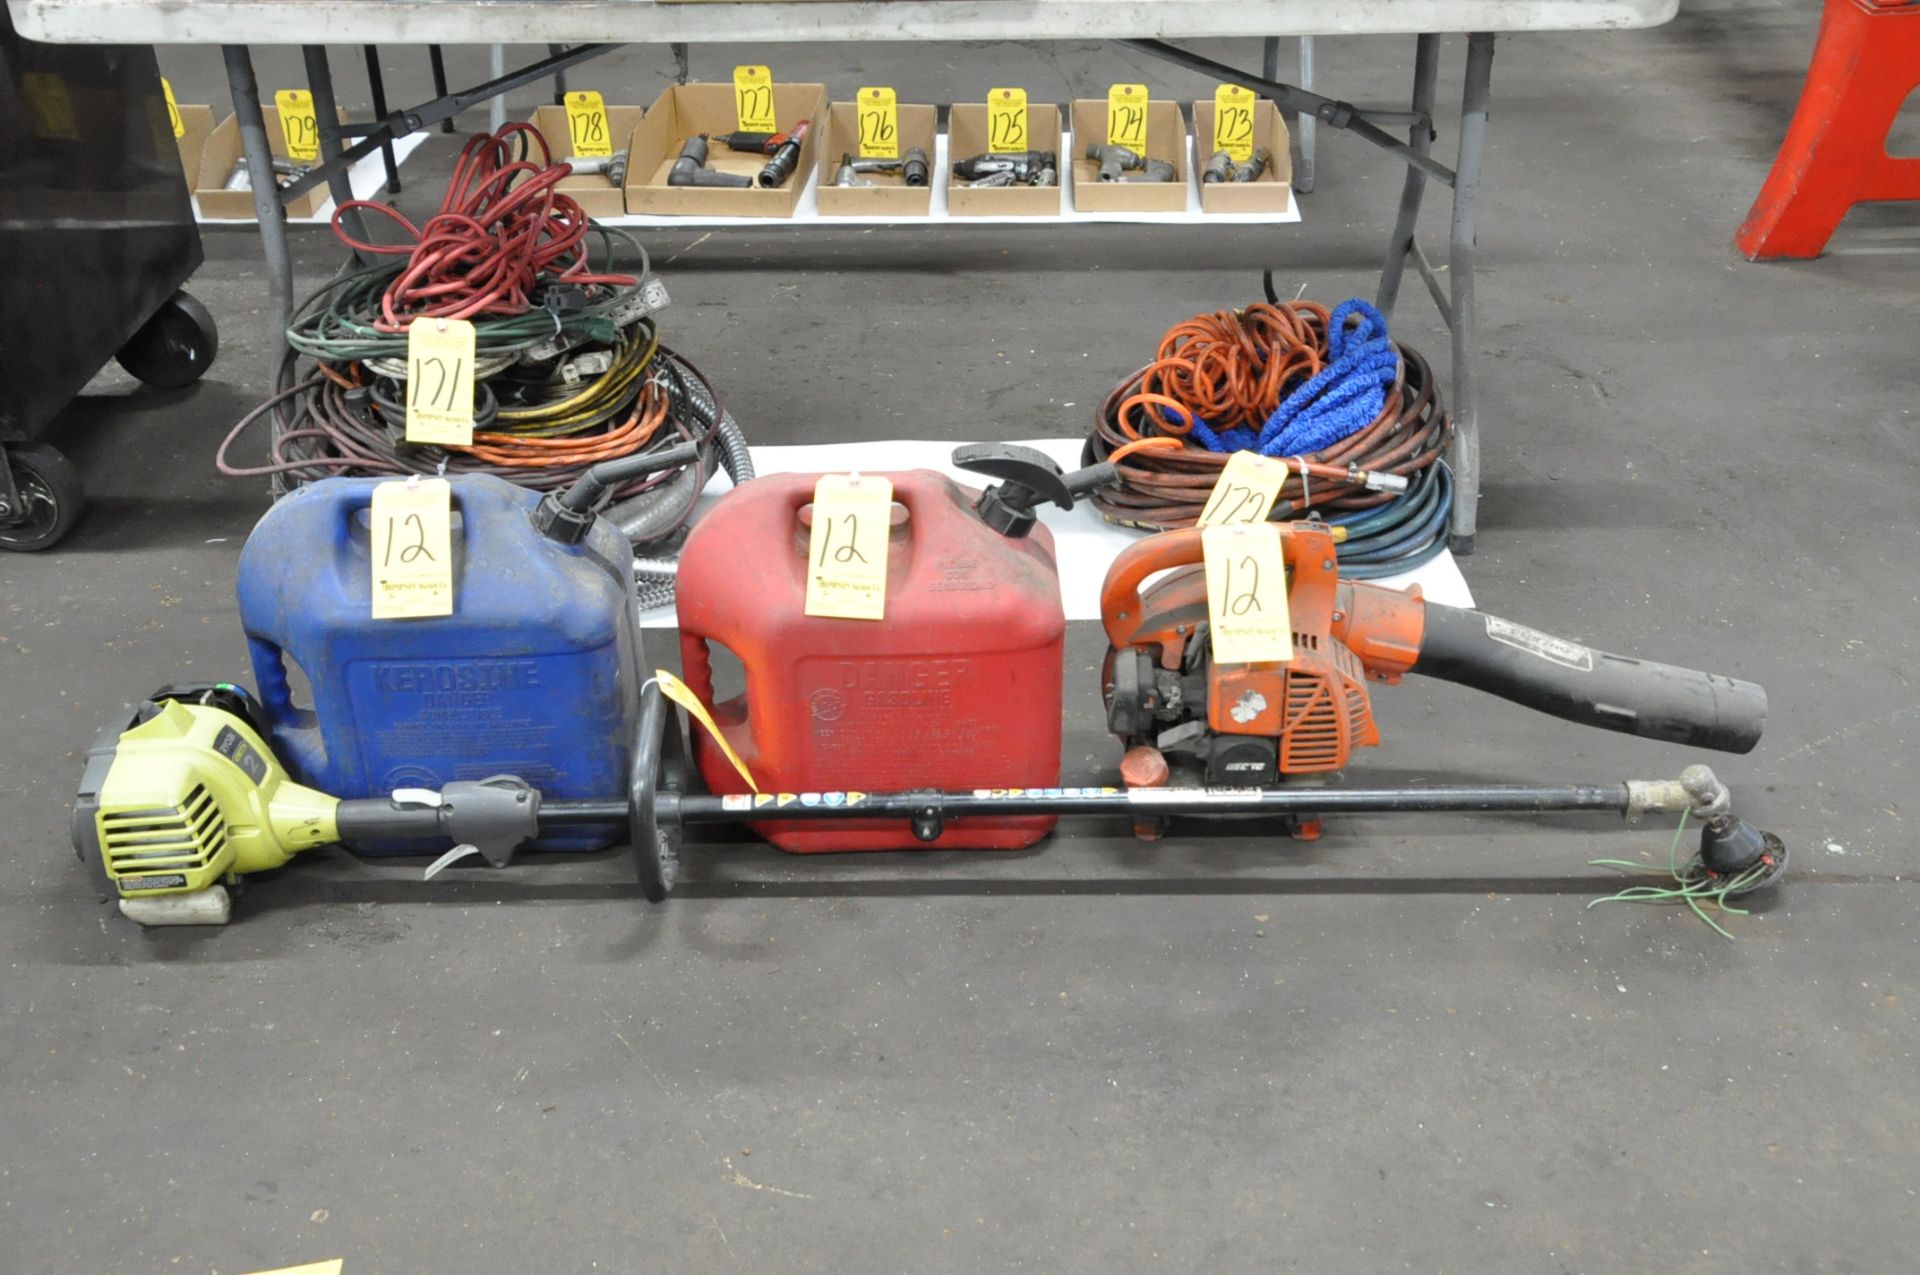 Lot-(1) Ryobi Full Crank 2-Cycle Gas Weed Whip, (1) Echo Gas Powered Blower, and (2) Fuel Cans